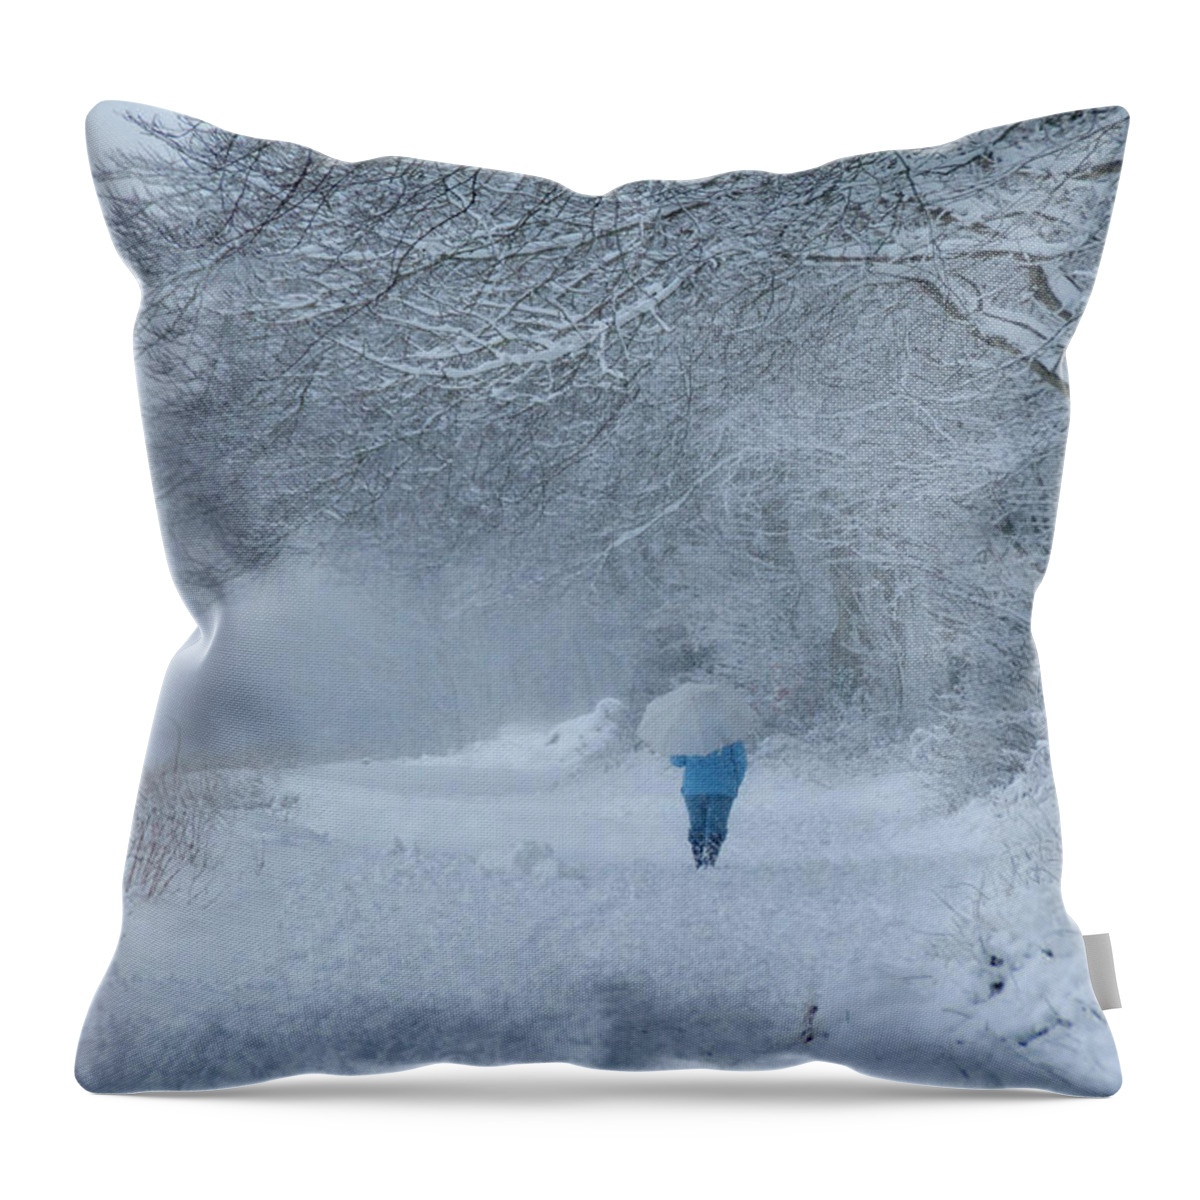 Snow Throw Pillow featuring the photograph Walking in the Snow by Joe Ormonde